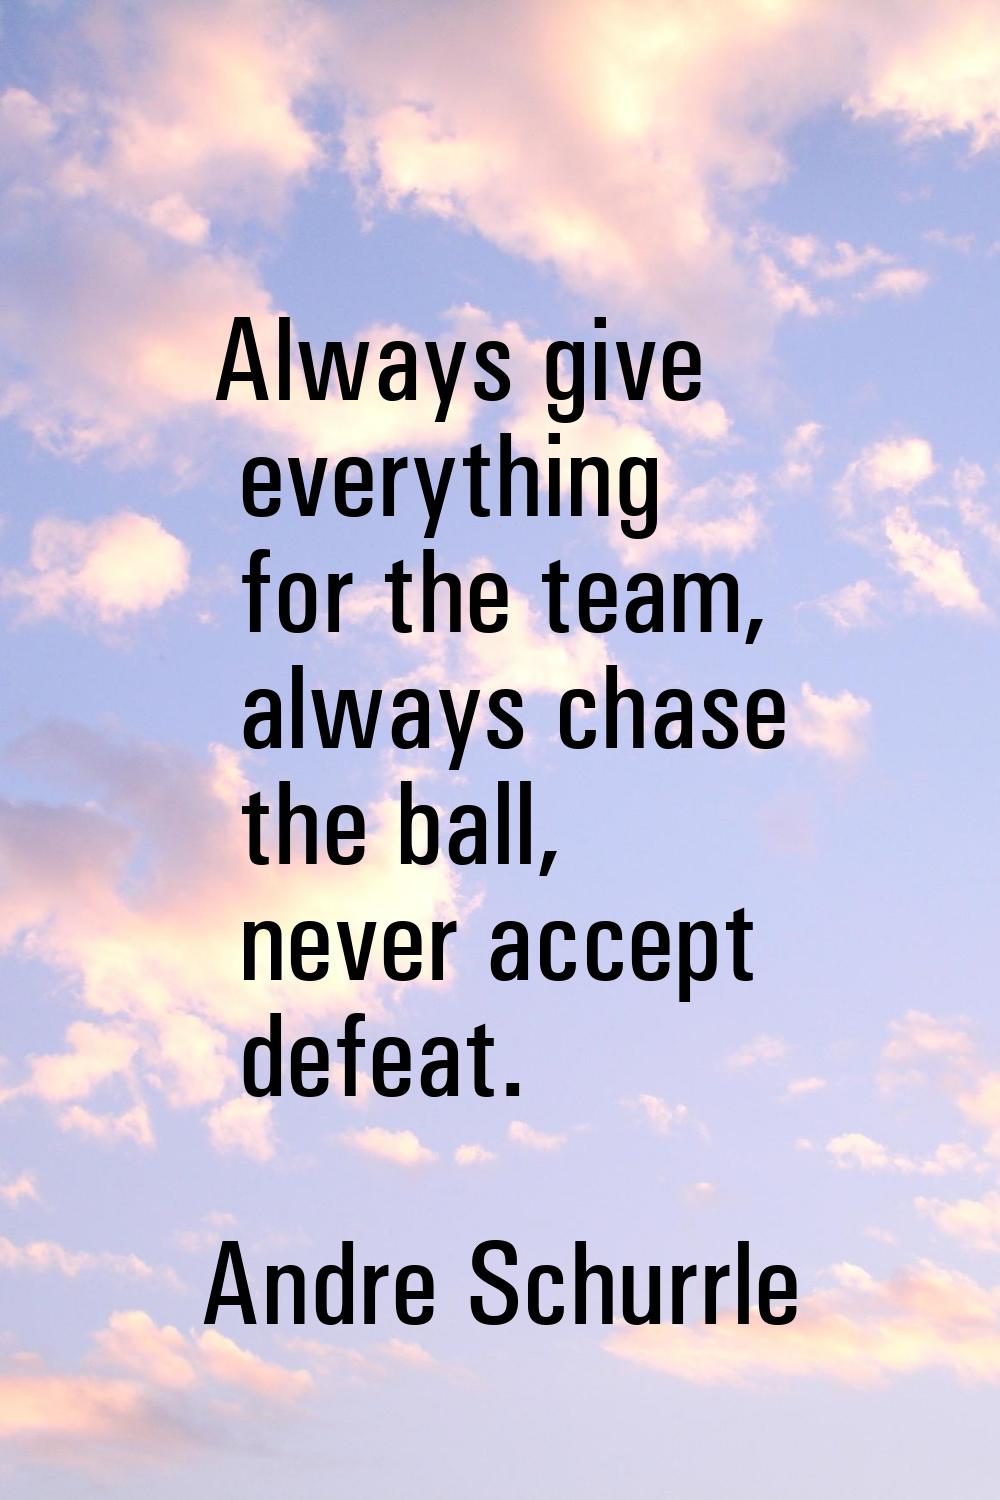 Always give everything for the team, always chase the ball, never accept defeat.